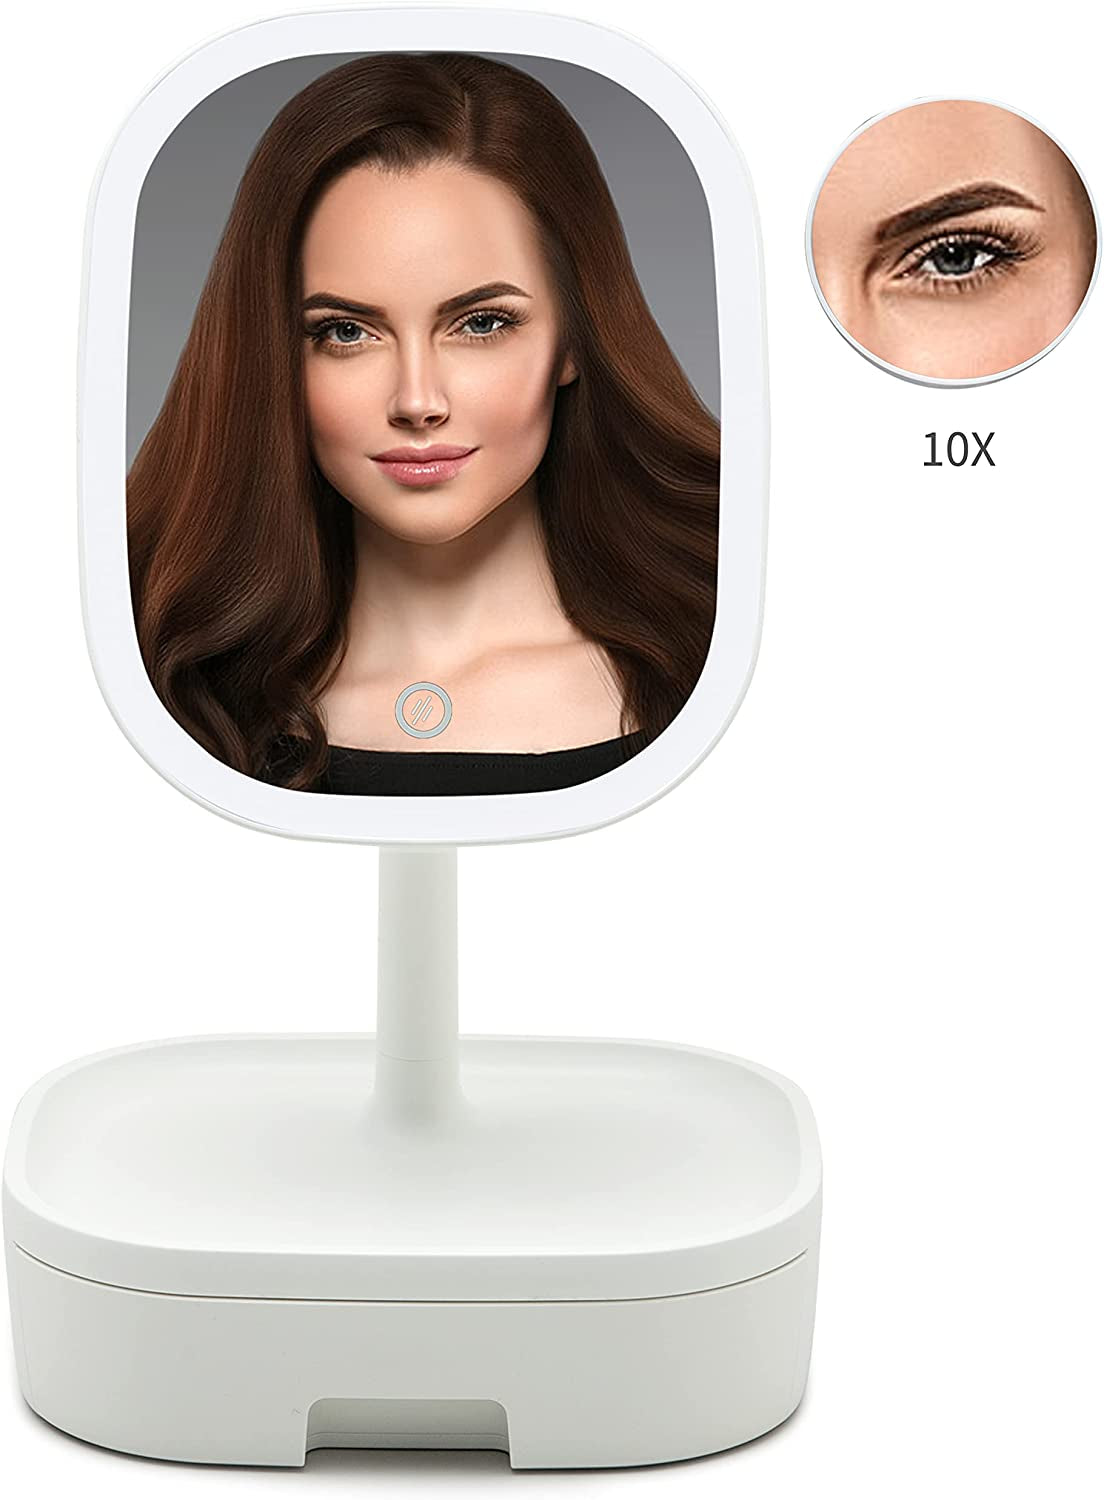 Professional title: " Portable Lighted Vanity Mirror with Magnification, Foldable Desk Mirror for Home and Travel - White"